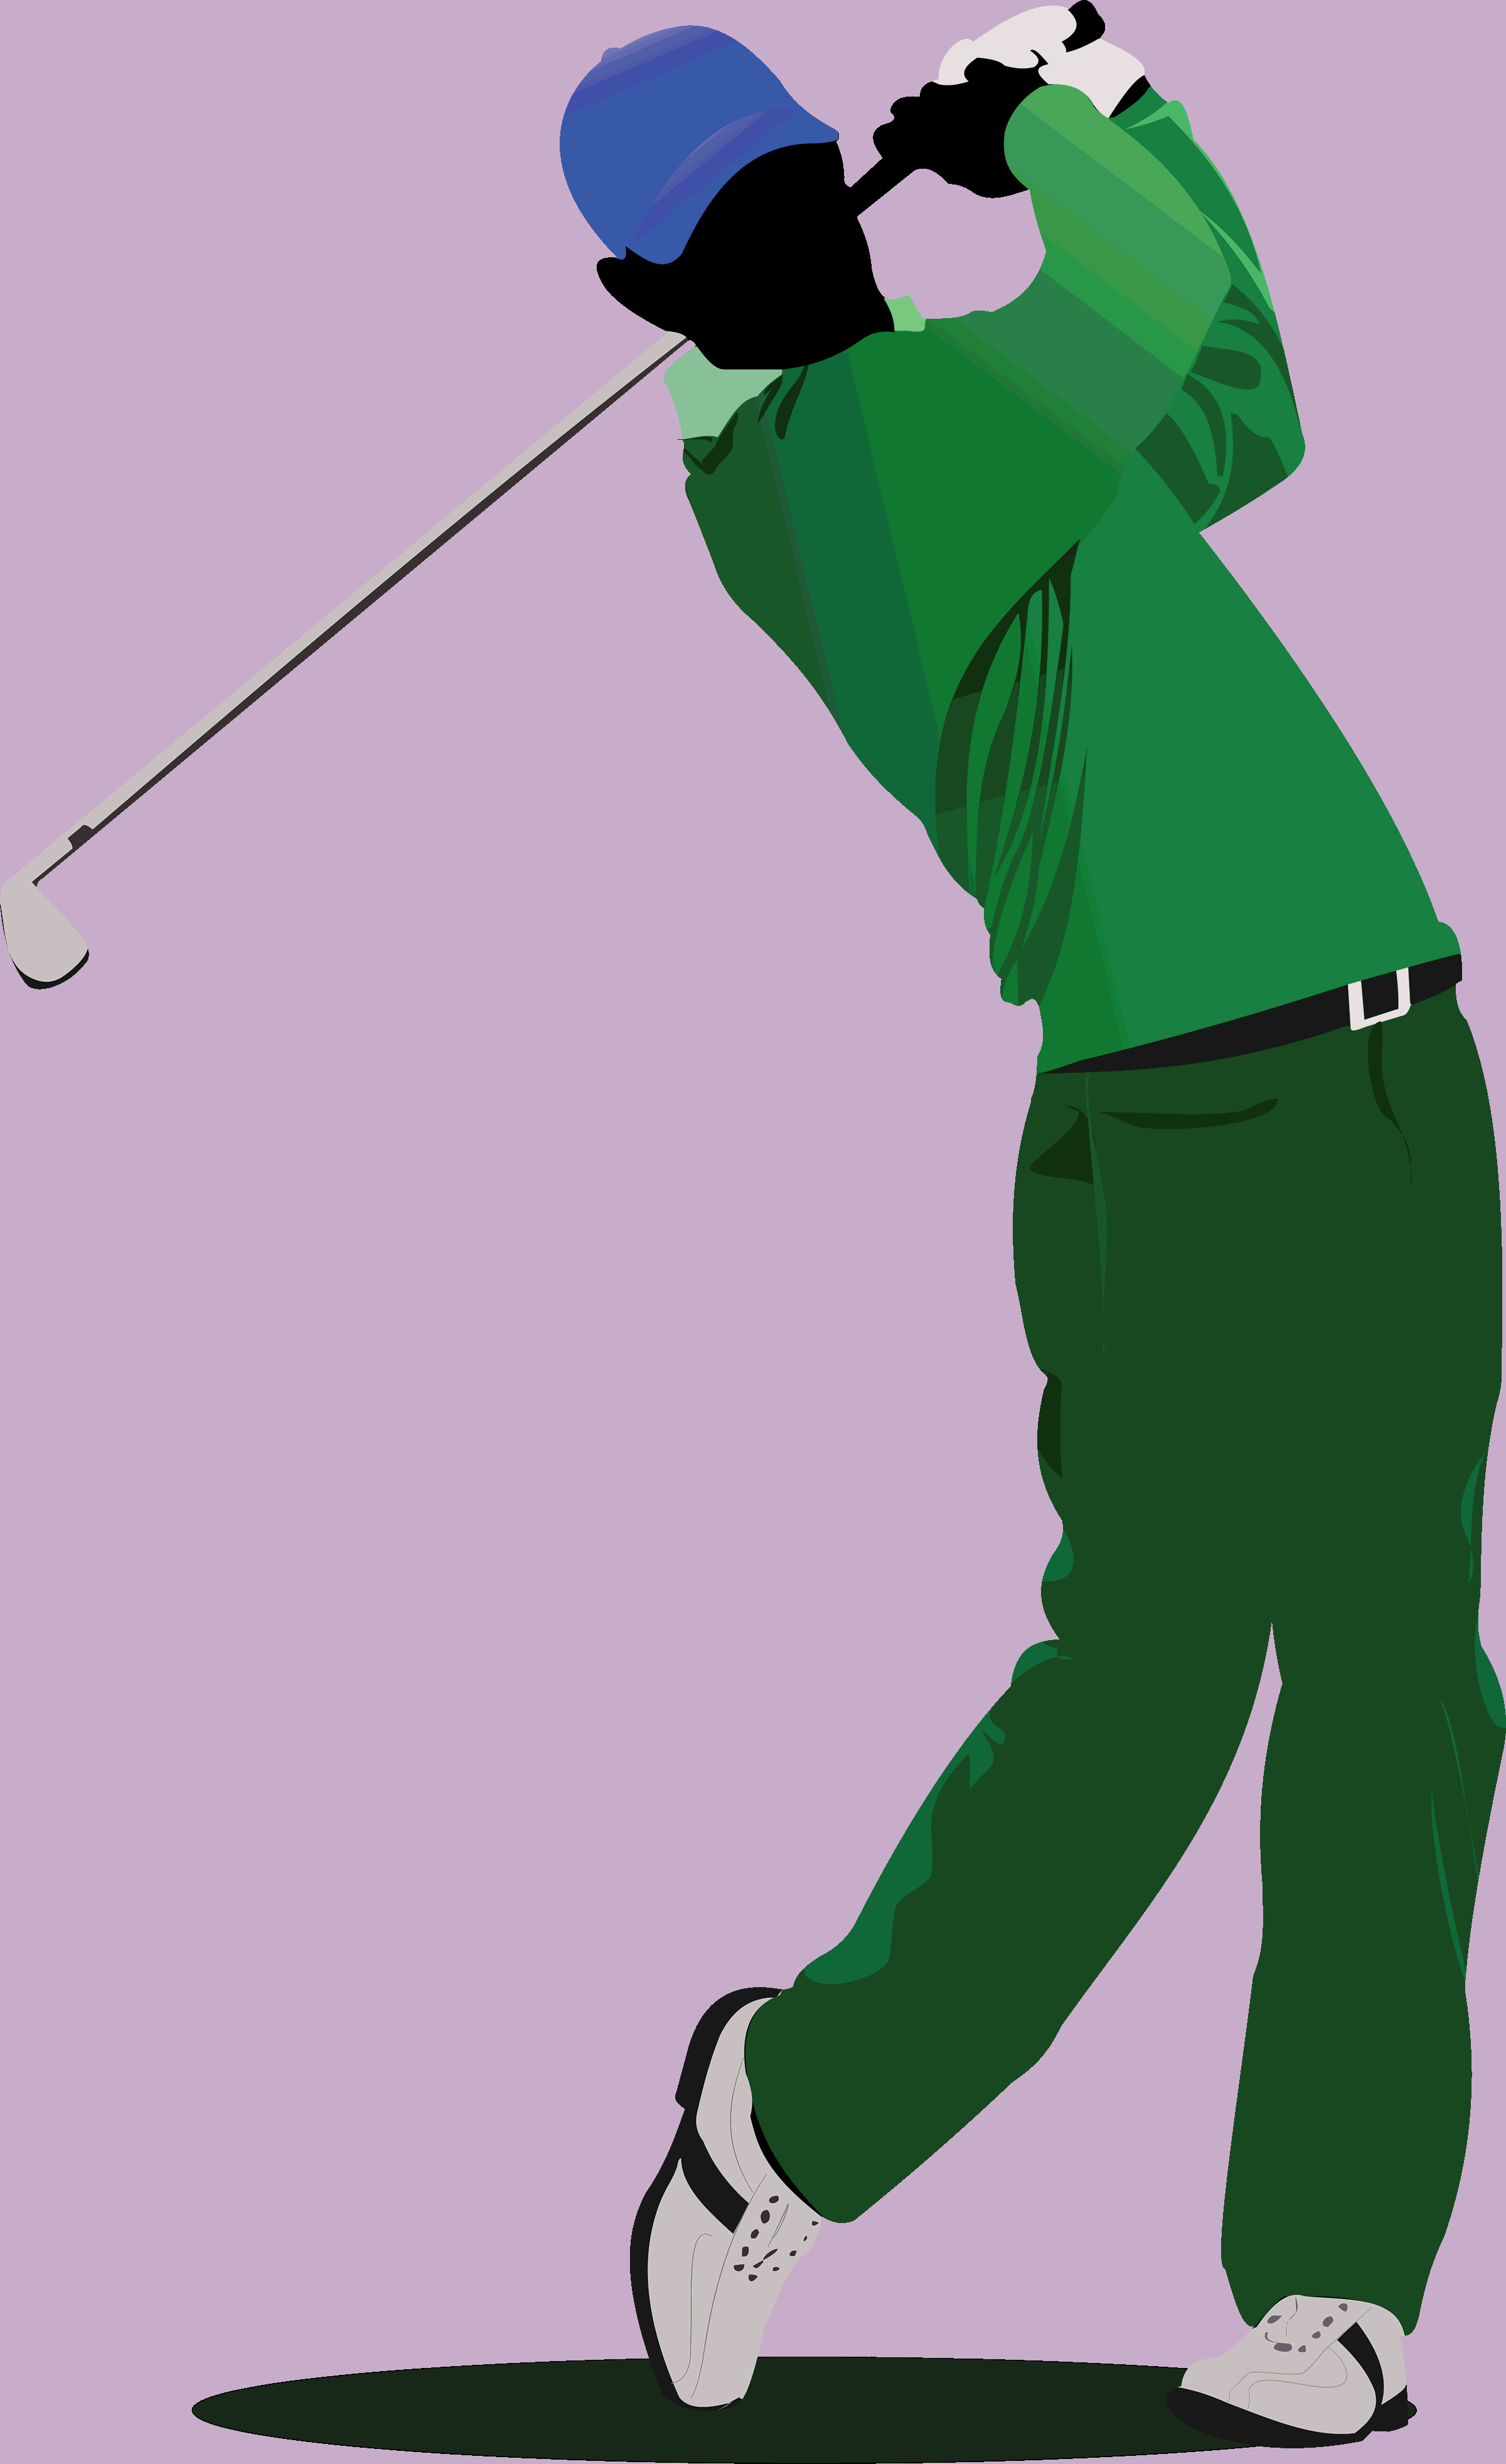 Free Golf Silhouette Cliparts, Download Free Golf